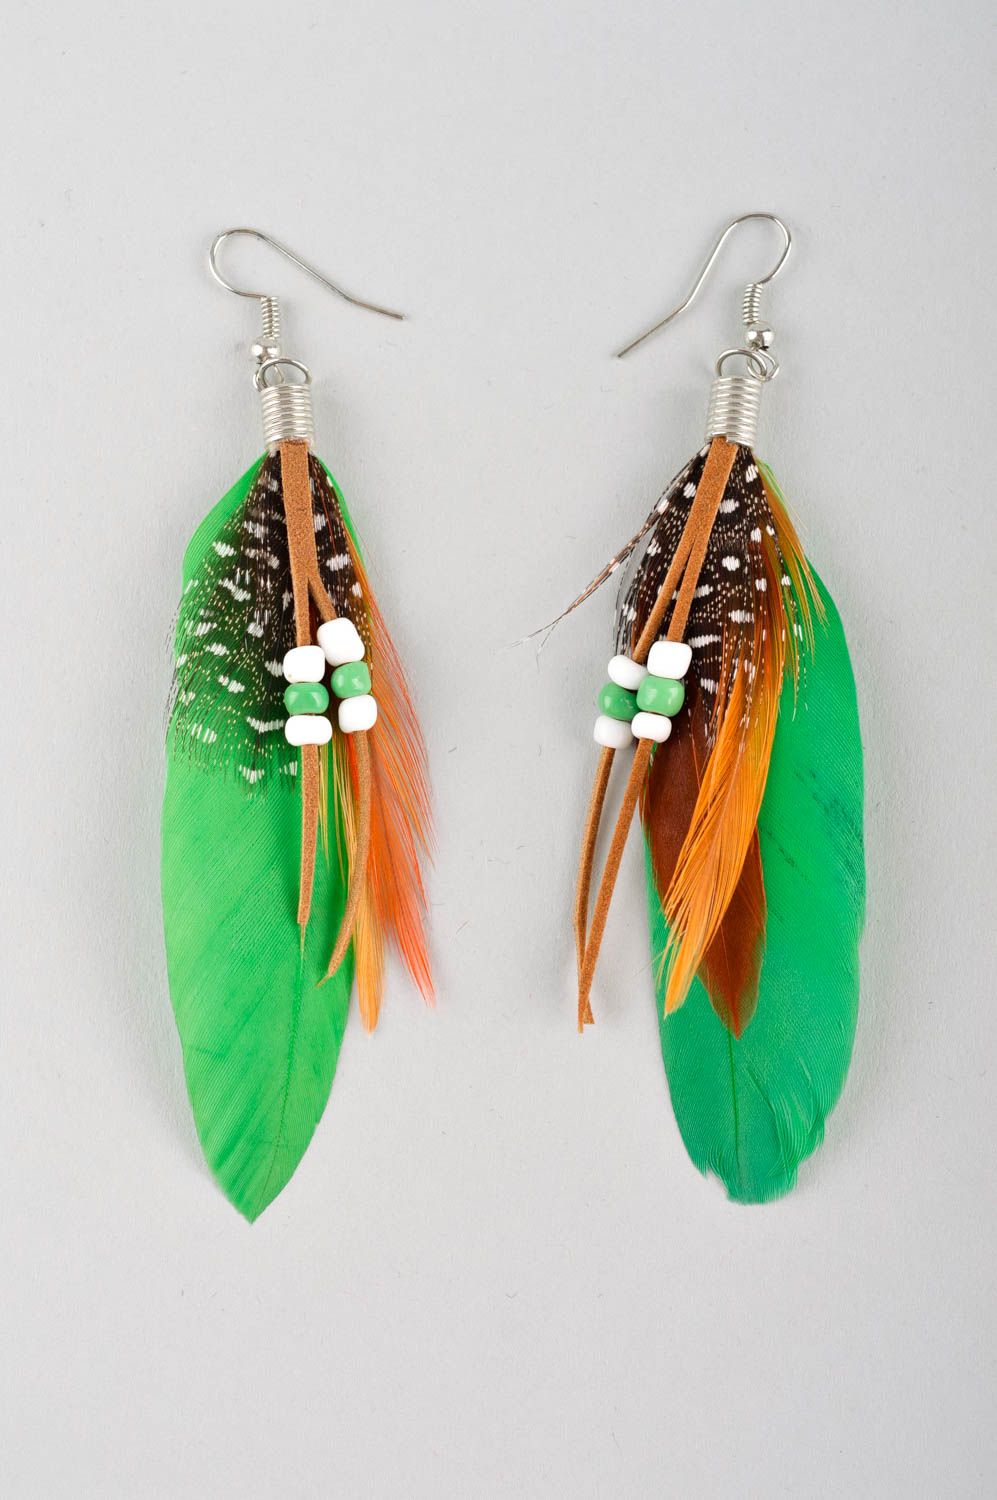 Handmade earrings with charms feather earrings long earrings feather jewelry photo 3